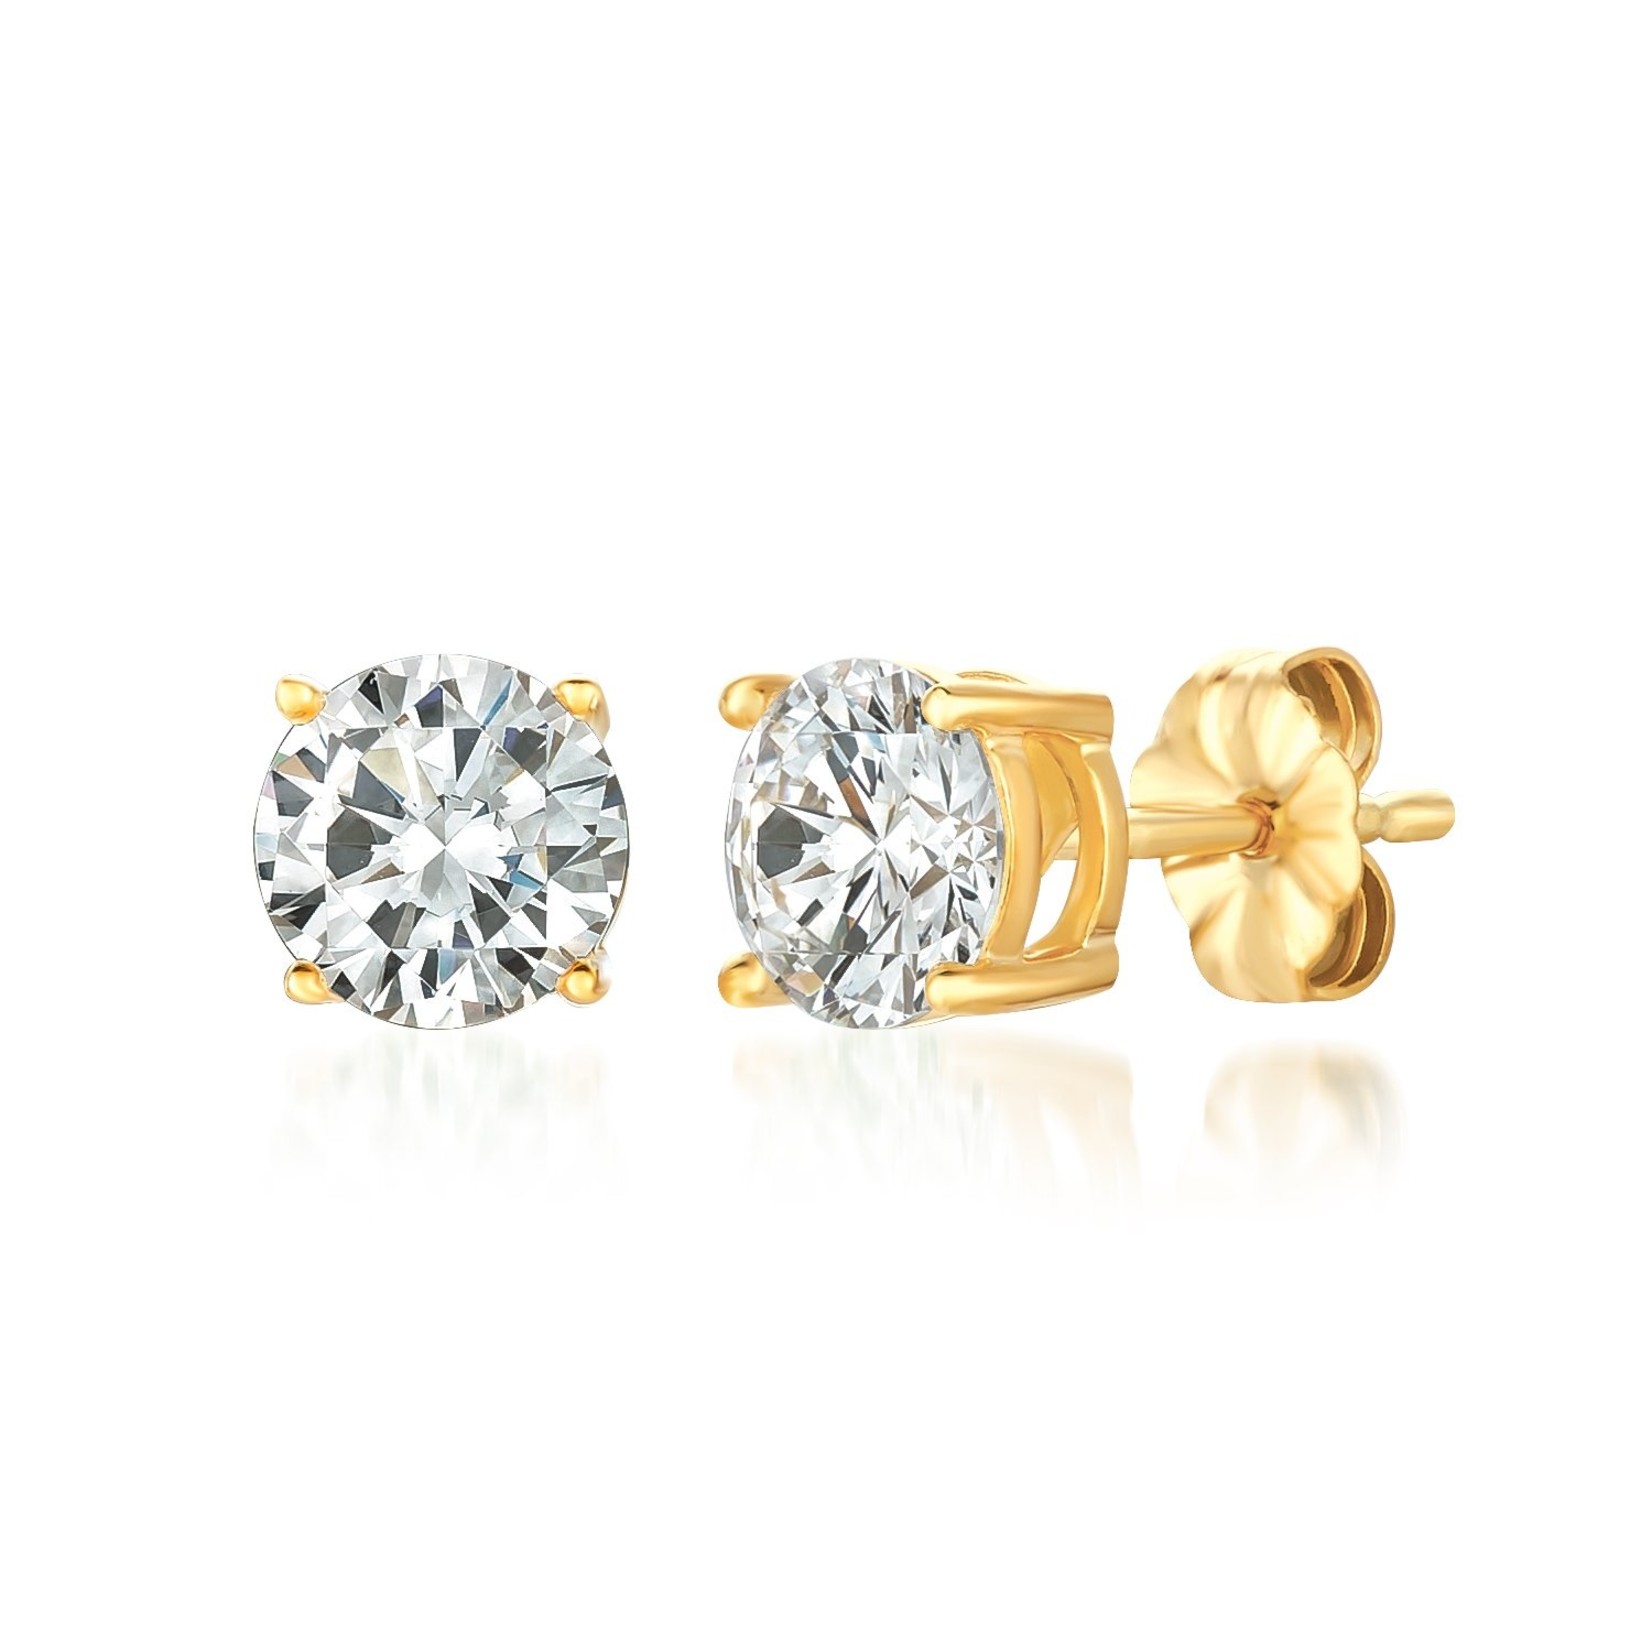 Crislu 2.0 CTTW Solitaire Brilliant Stud Earrings Finished in 18kt Yellow Gold 300166E00CZ